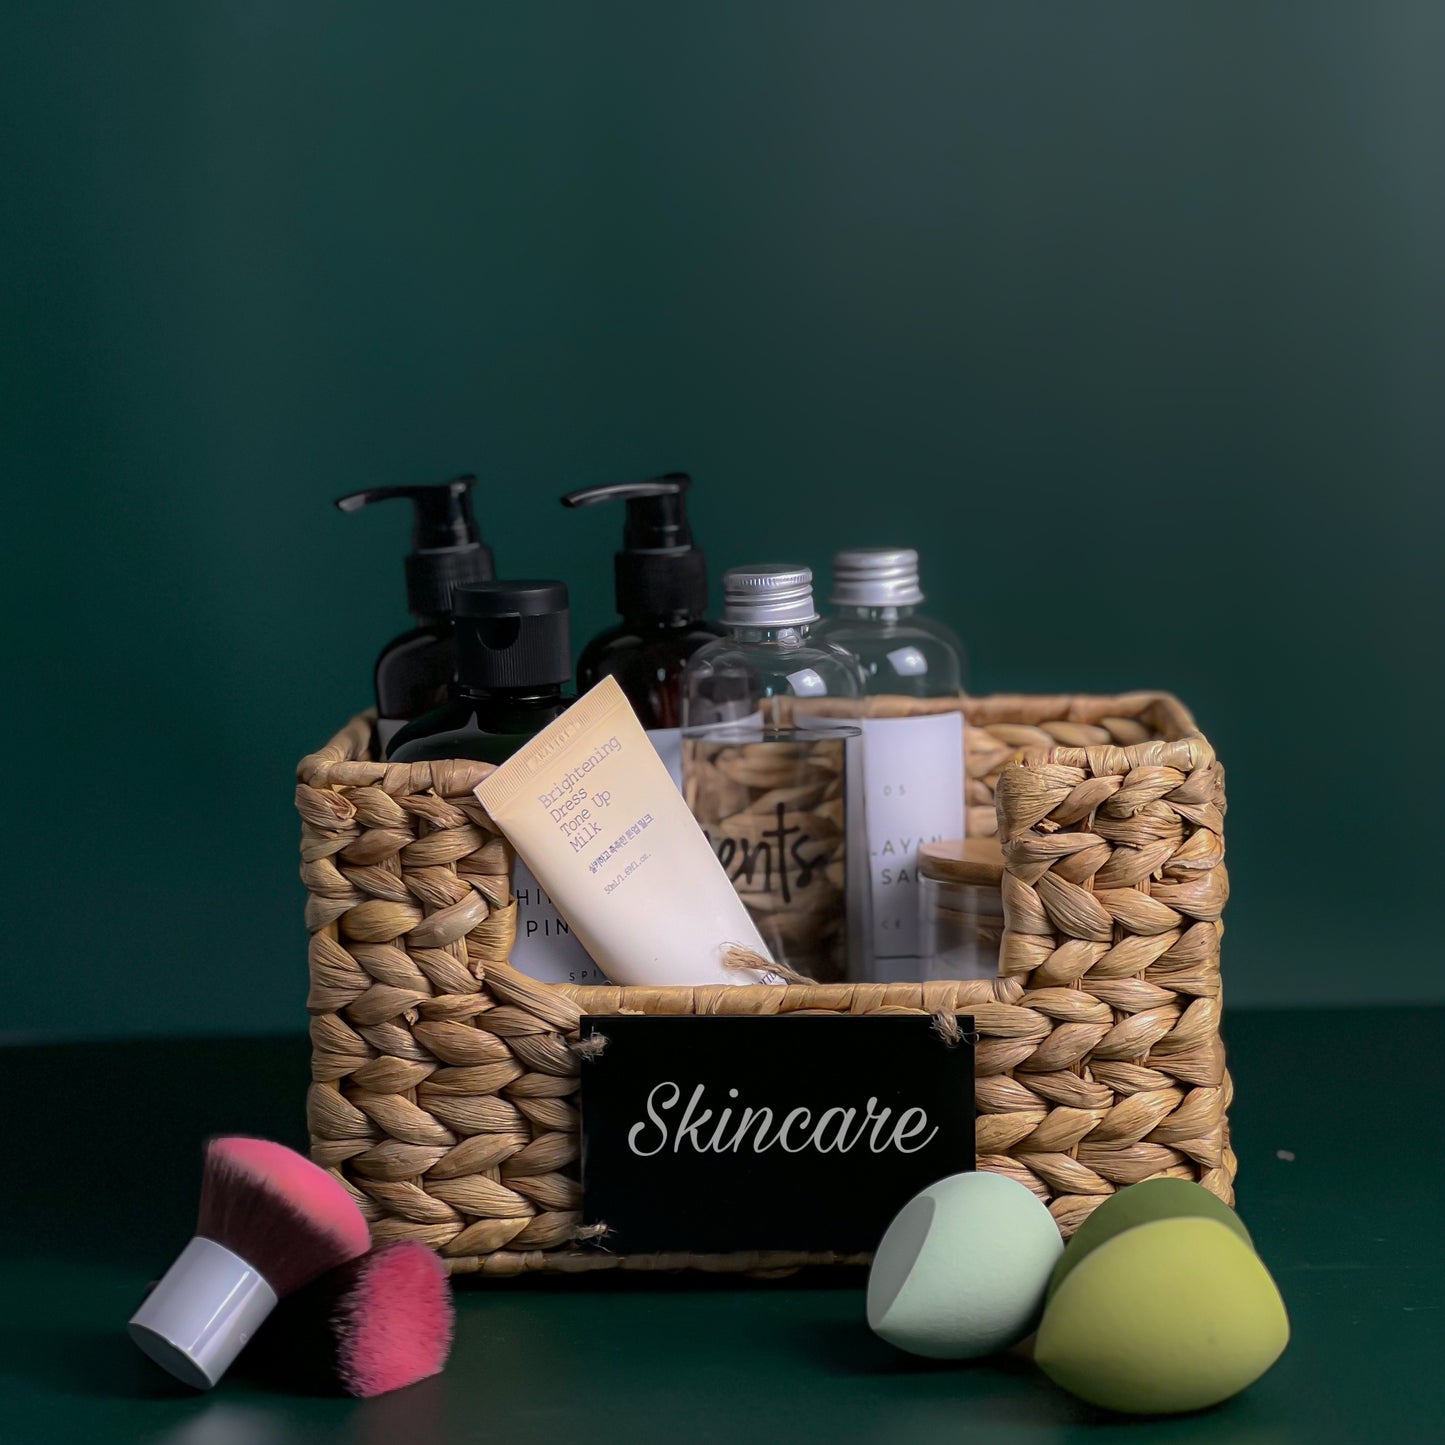 Skin care, Lotion, Makeup tray